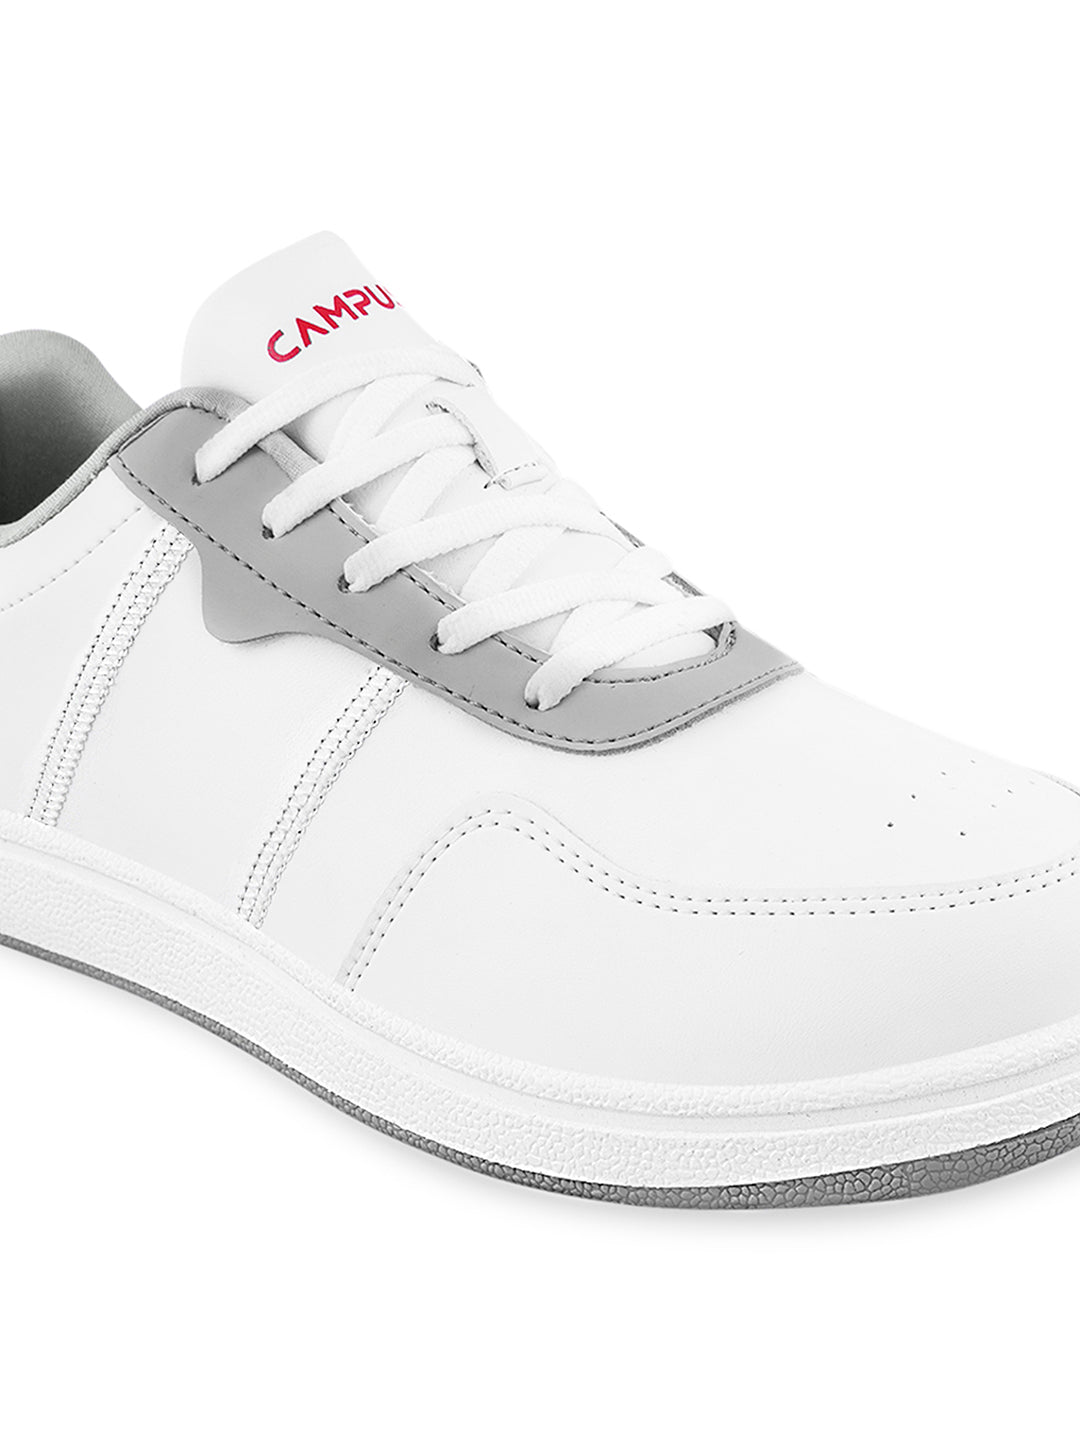 Double Core Yellow And White Men Sneakers Shoes, Casual Wear, Comfortable  And Washable at Best Price in Dhar | R.k. Shoes